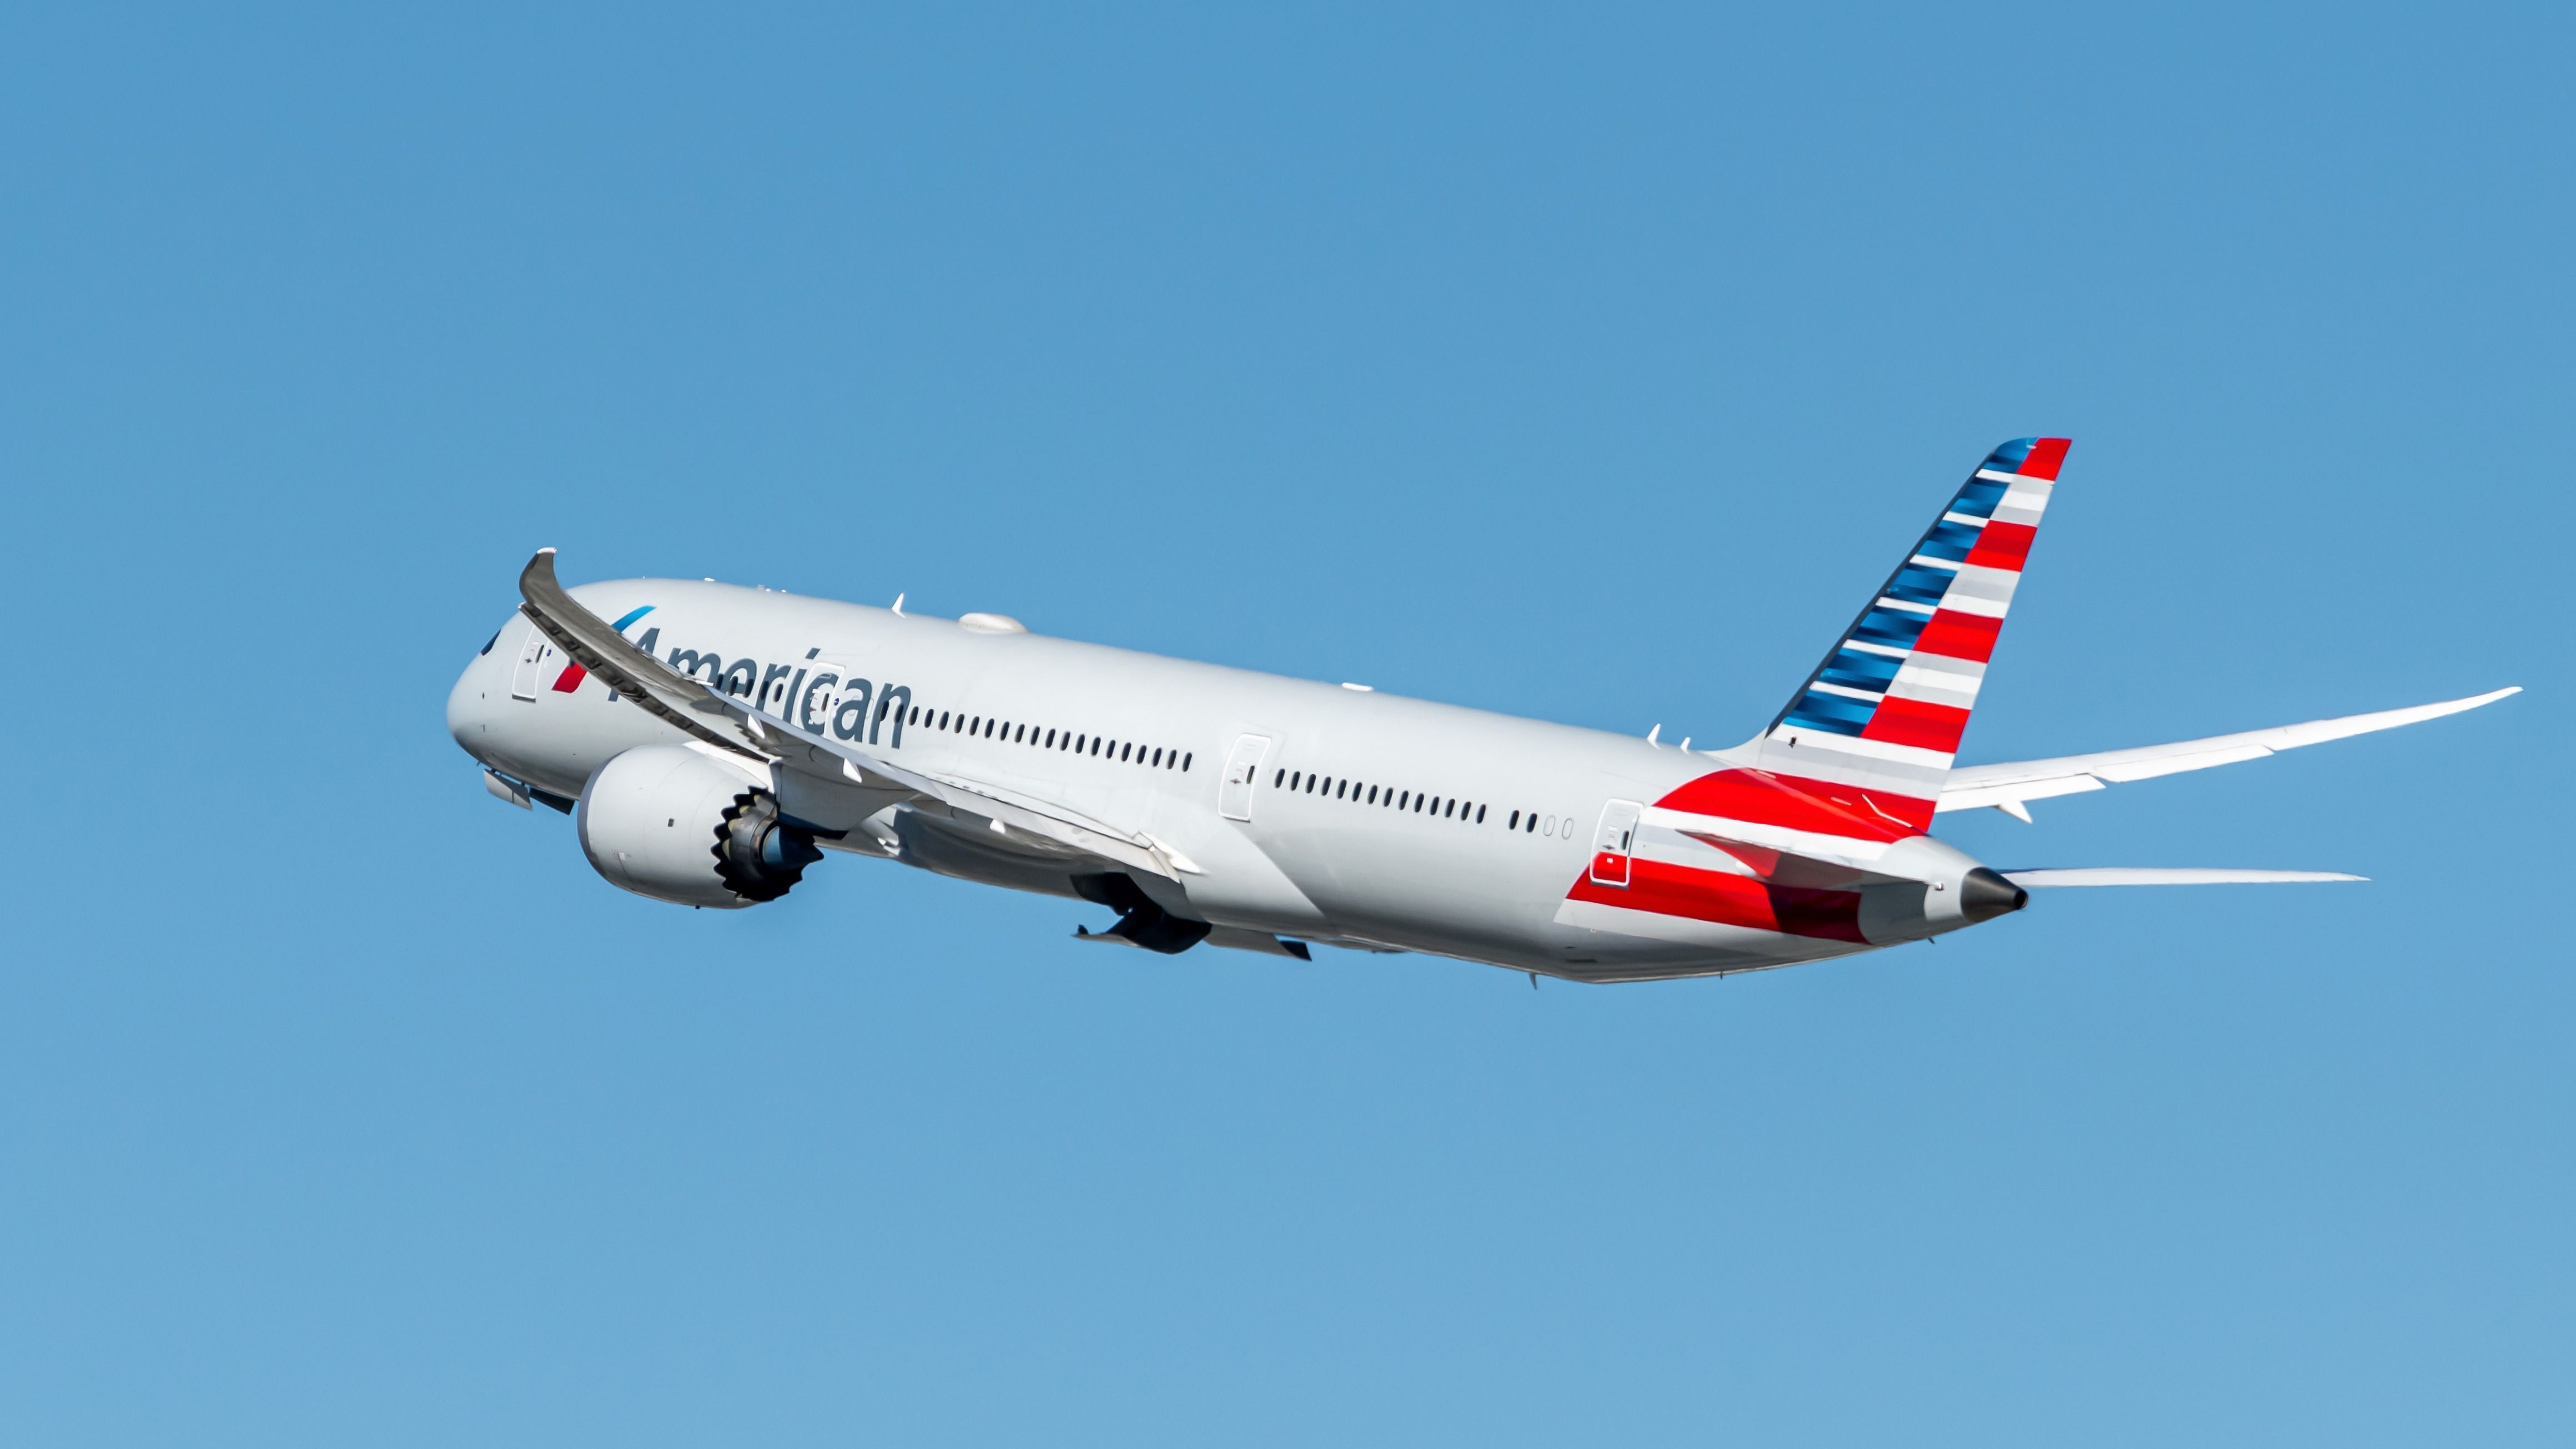 An American Airlines Boeing 787 flying in the sky.